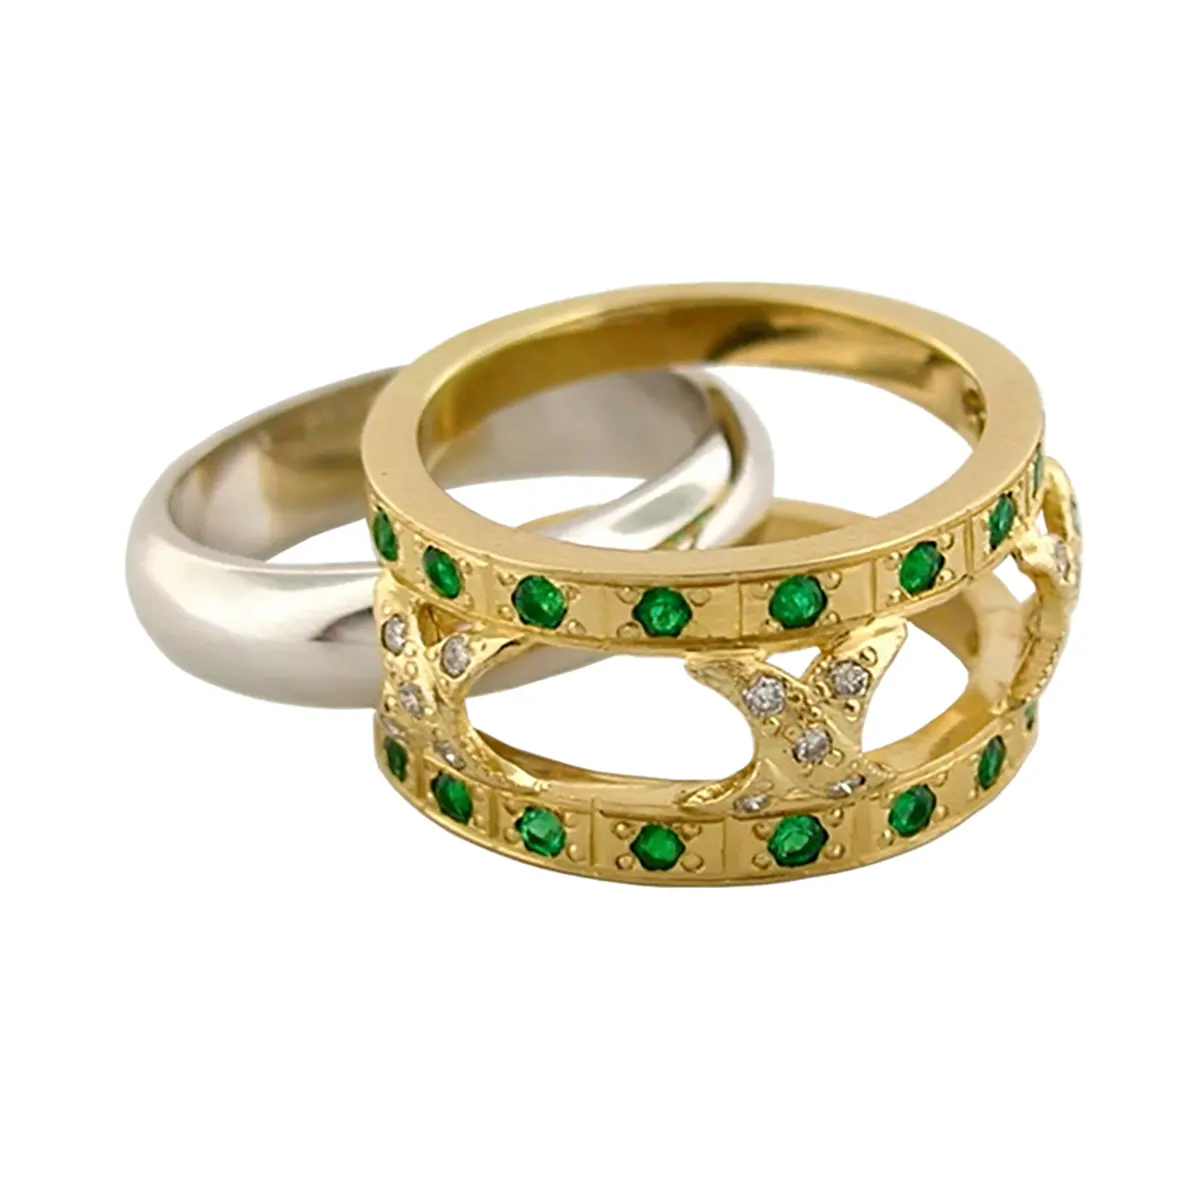 2 Tones Emerald and Diamond Band Ring in 18K Gold